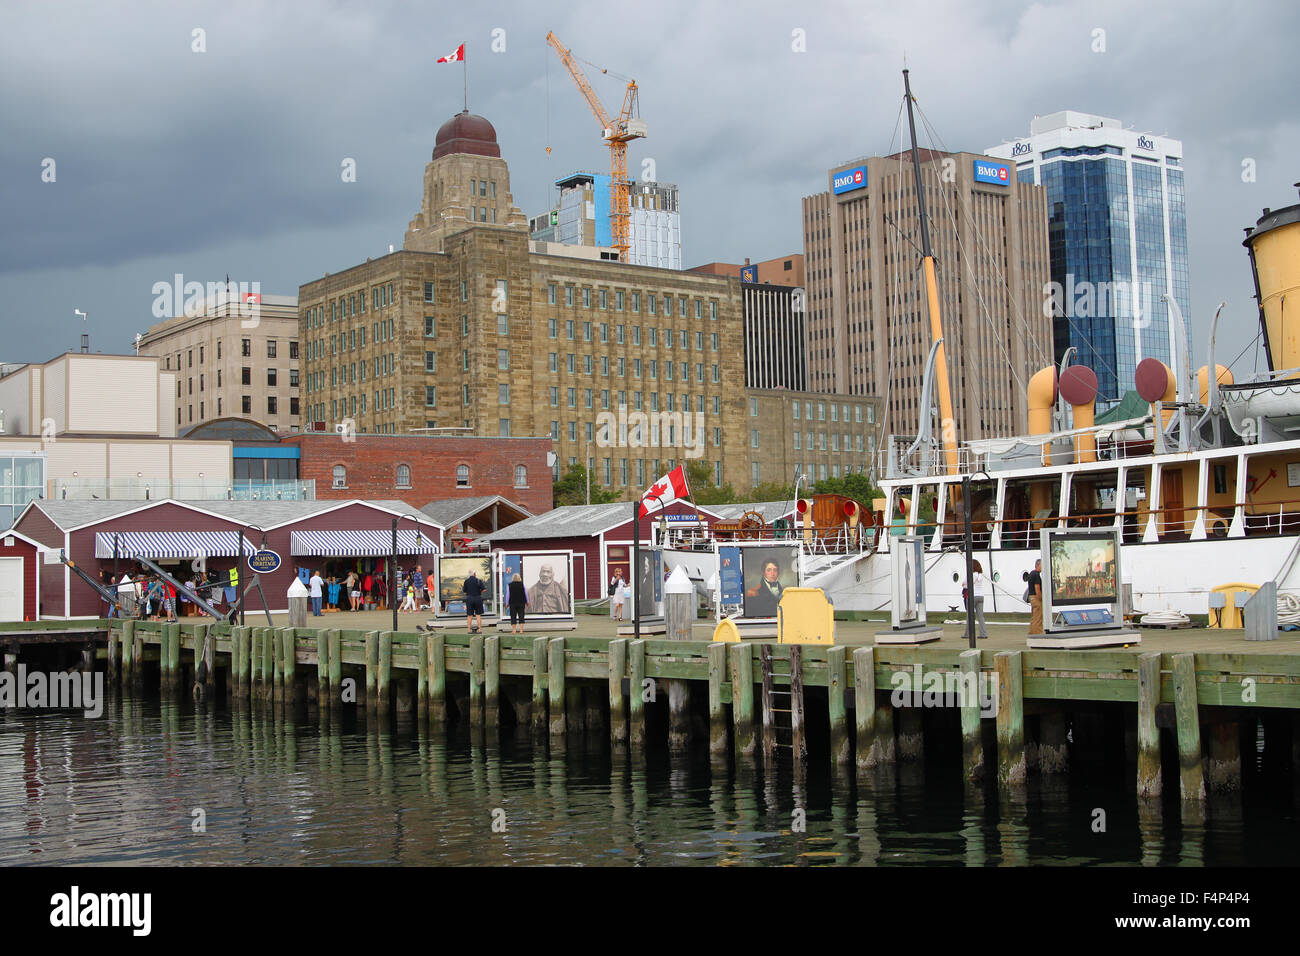 Halifax, Nova Scotia, Canada, August 9, 2014: Touristic harbor waterfront with shops and tourist, gray skies in the background i Stock Photo